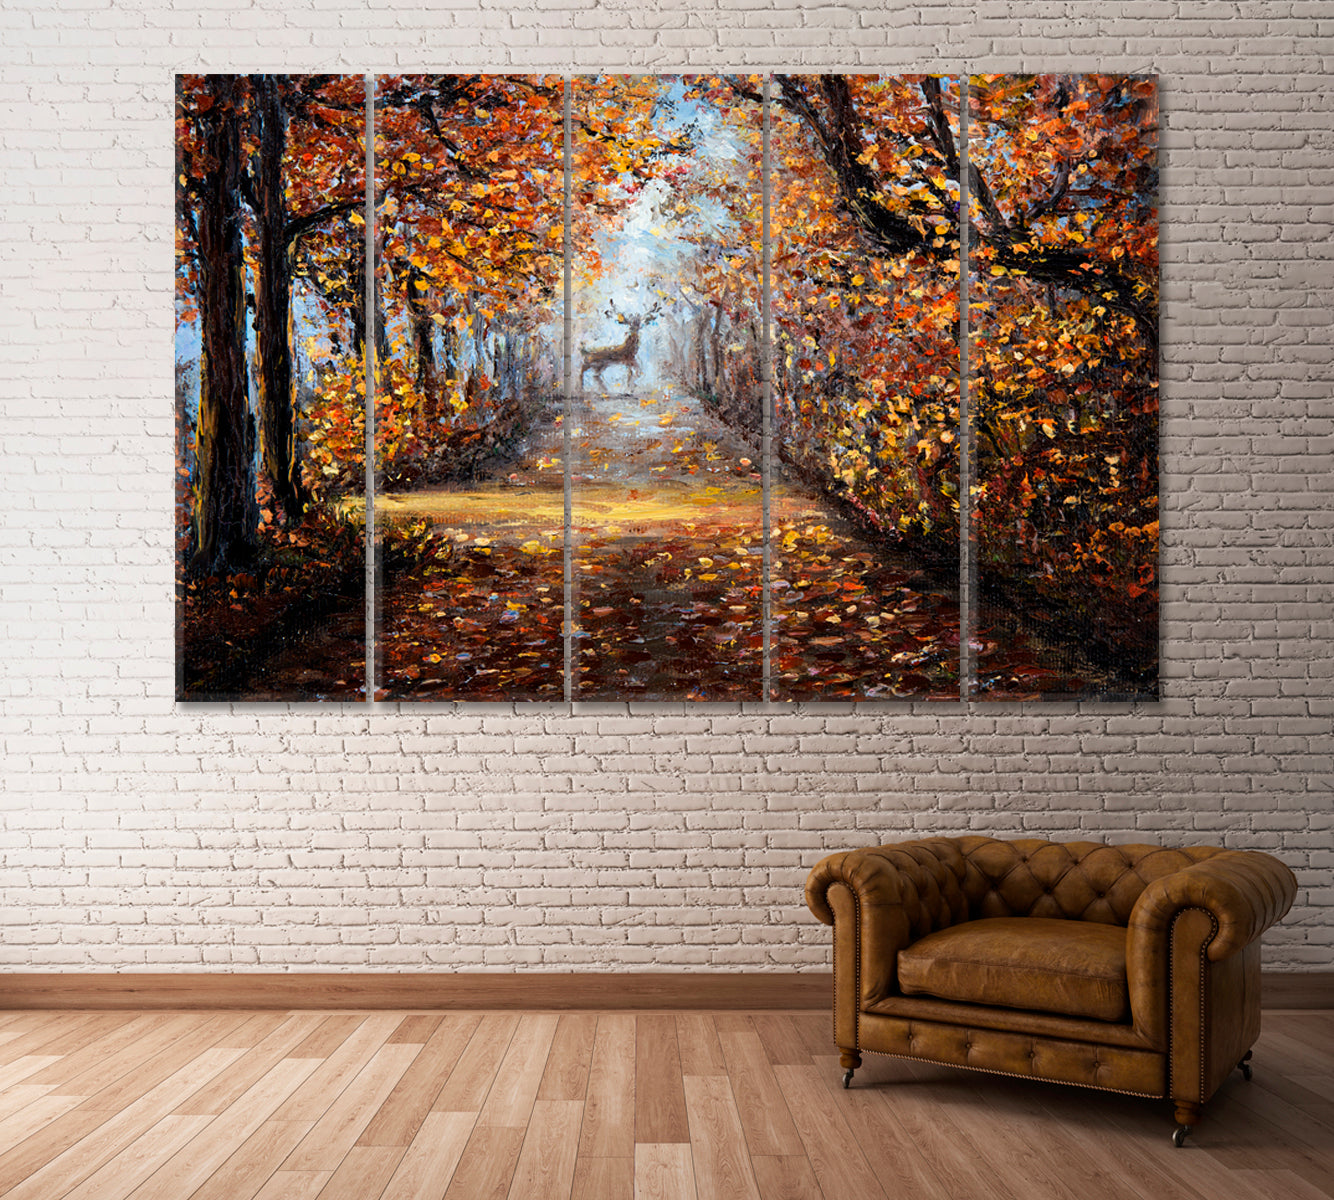 Deer in Autumn Forest Canvas Print ArtLexy 5 Panels 36"x24" inches 